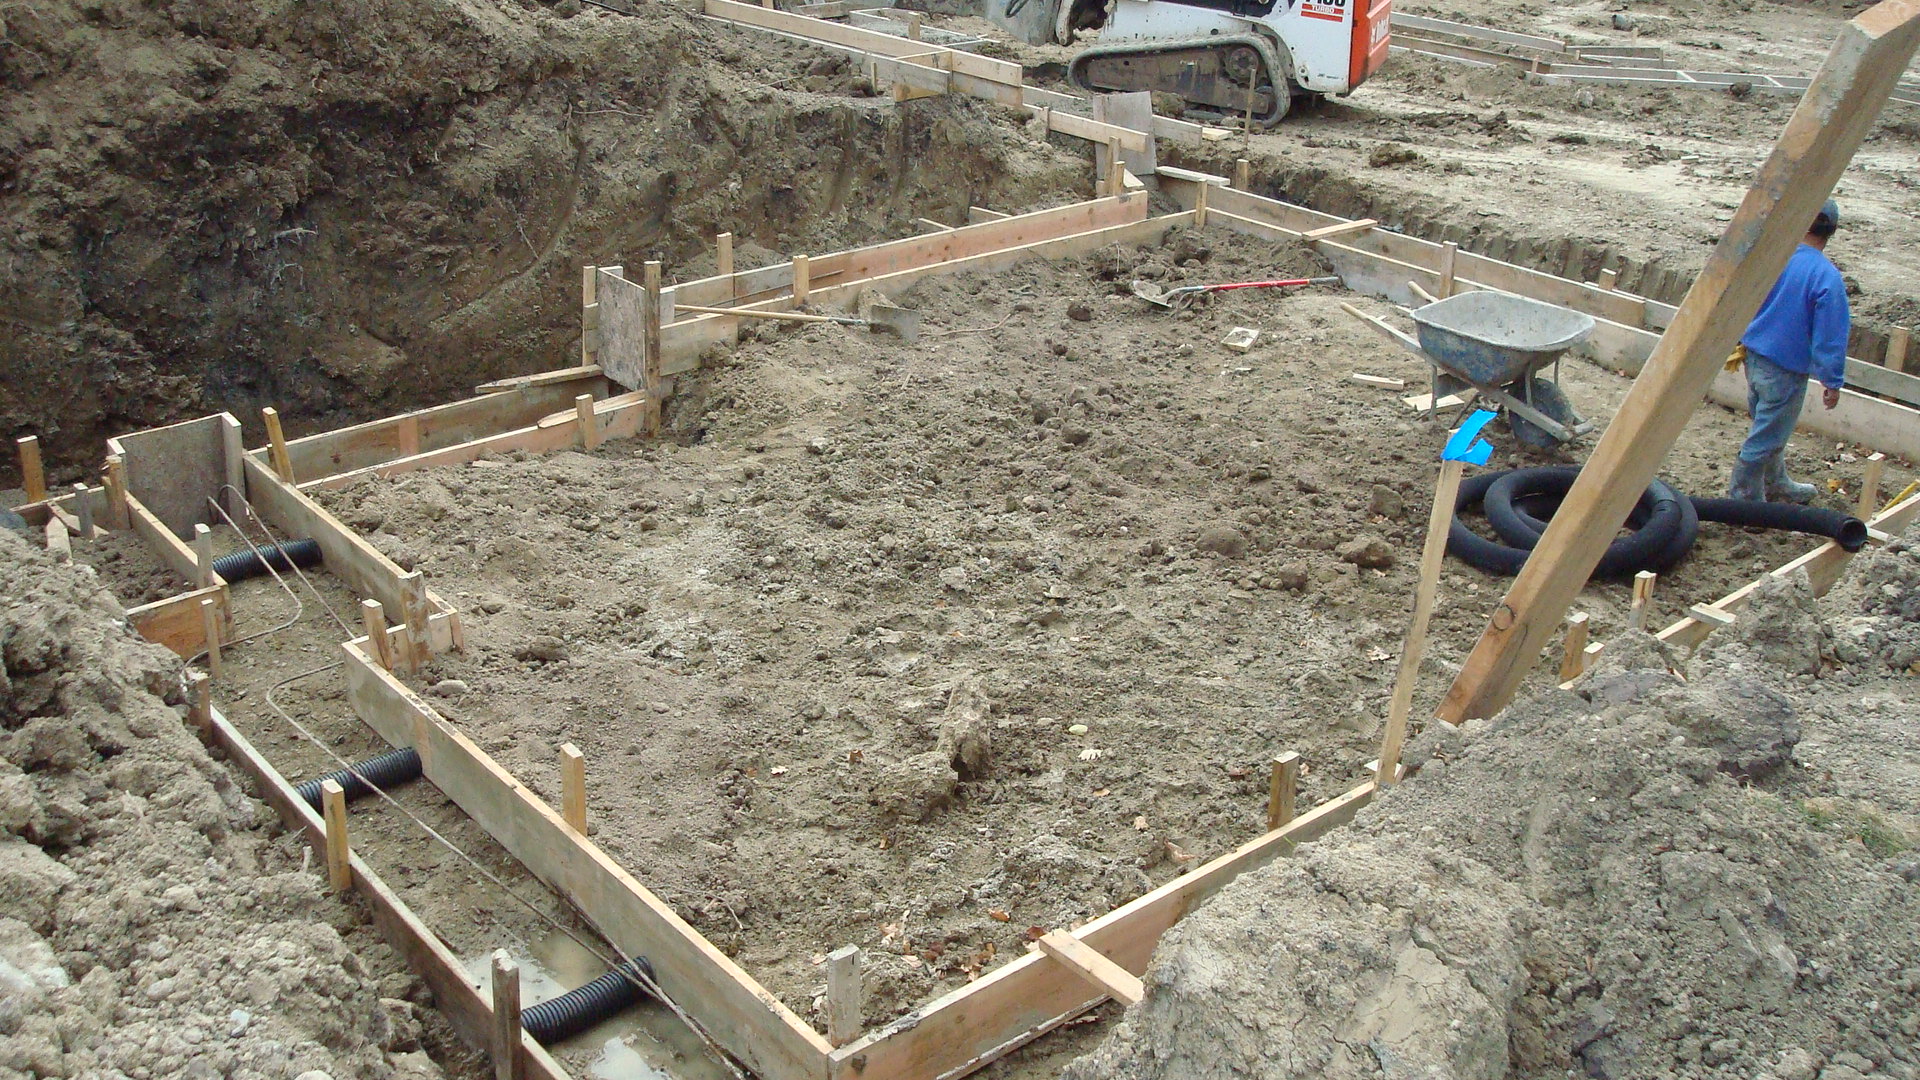 Voehl Construction provides foundation excavation digging and concrete pouring services for residential and commercial properties in the Twin Cities metro area.